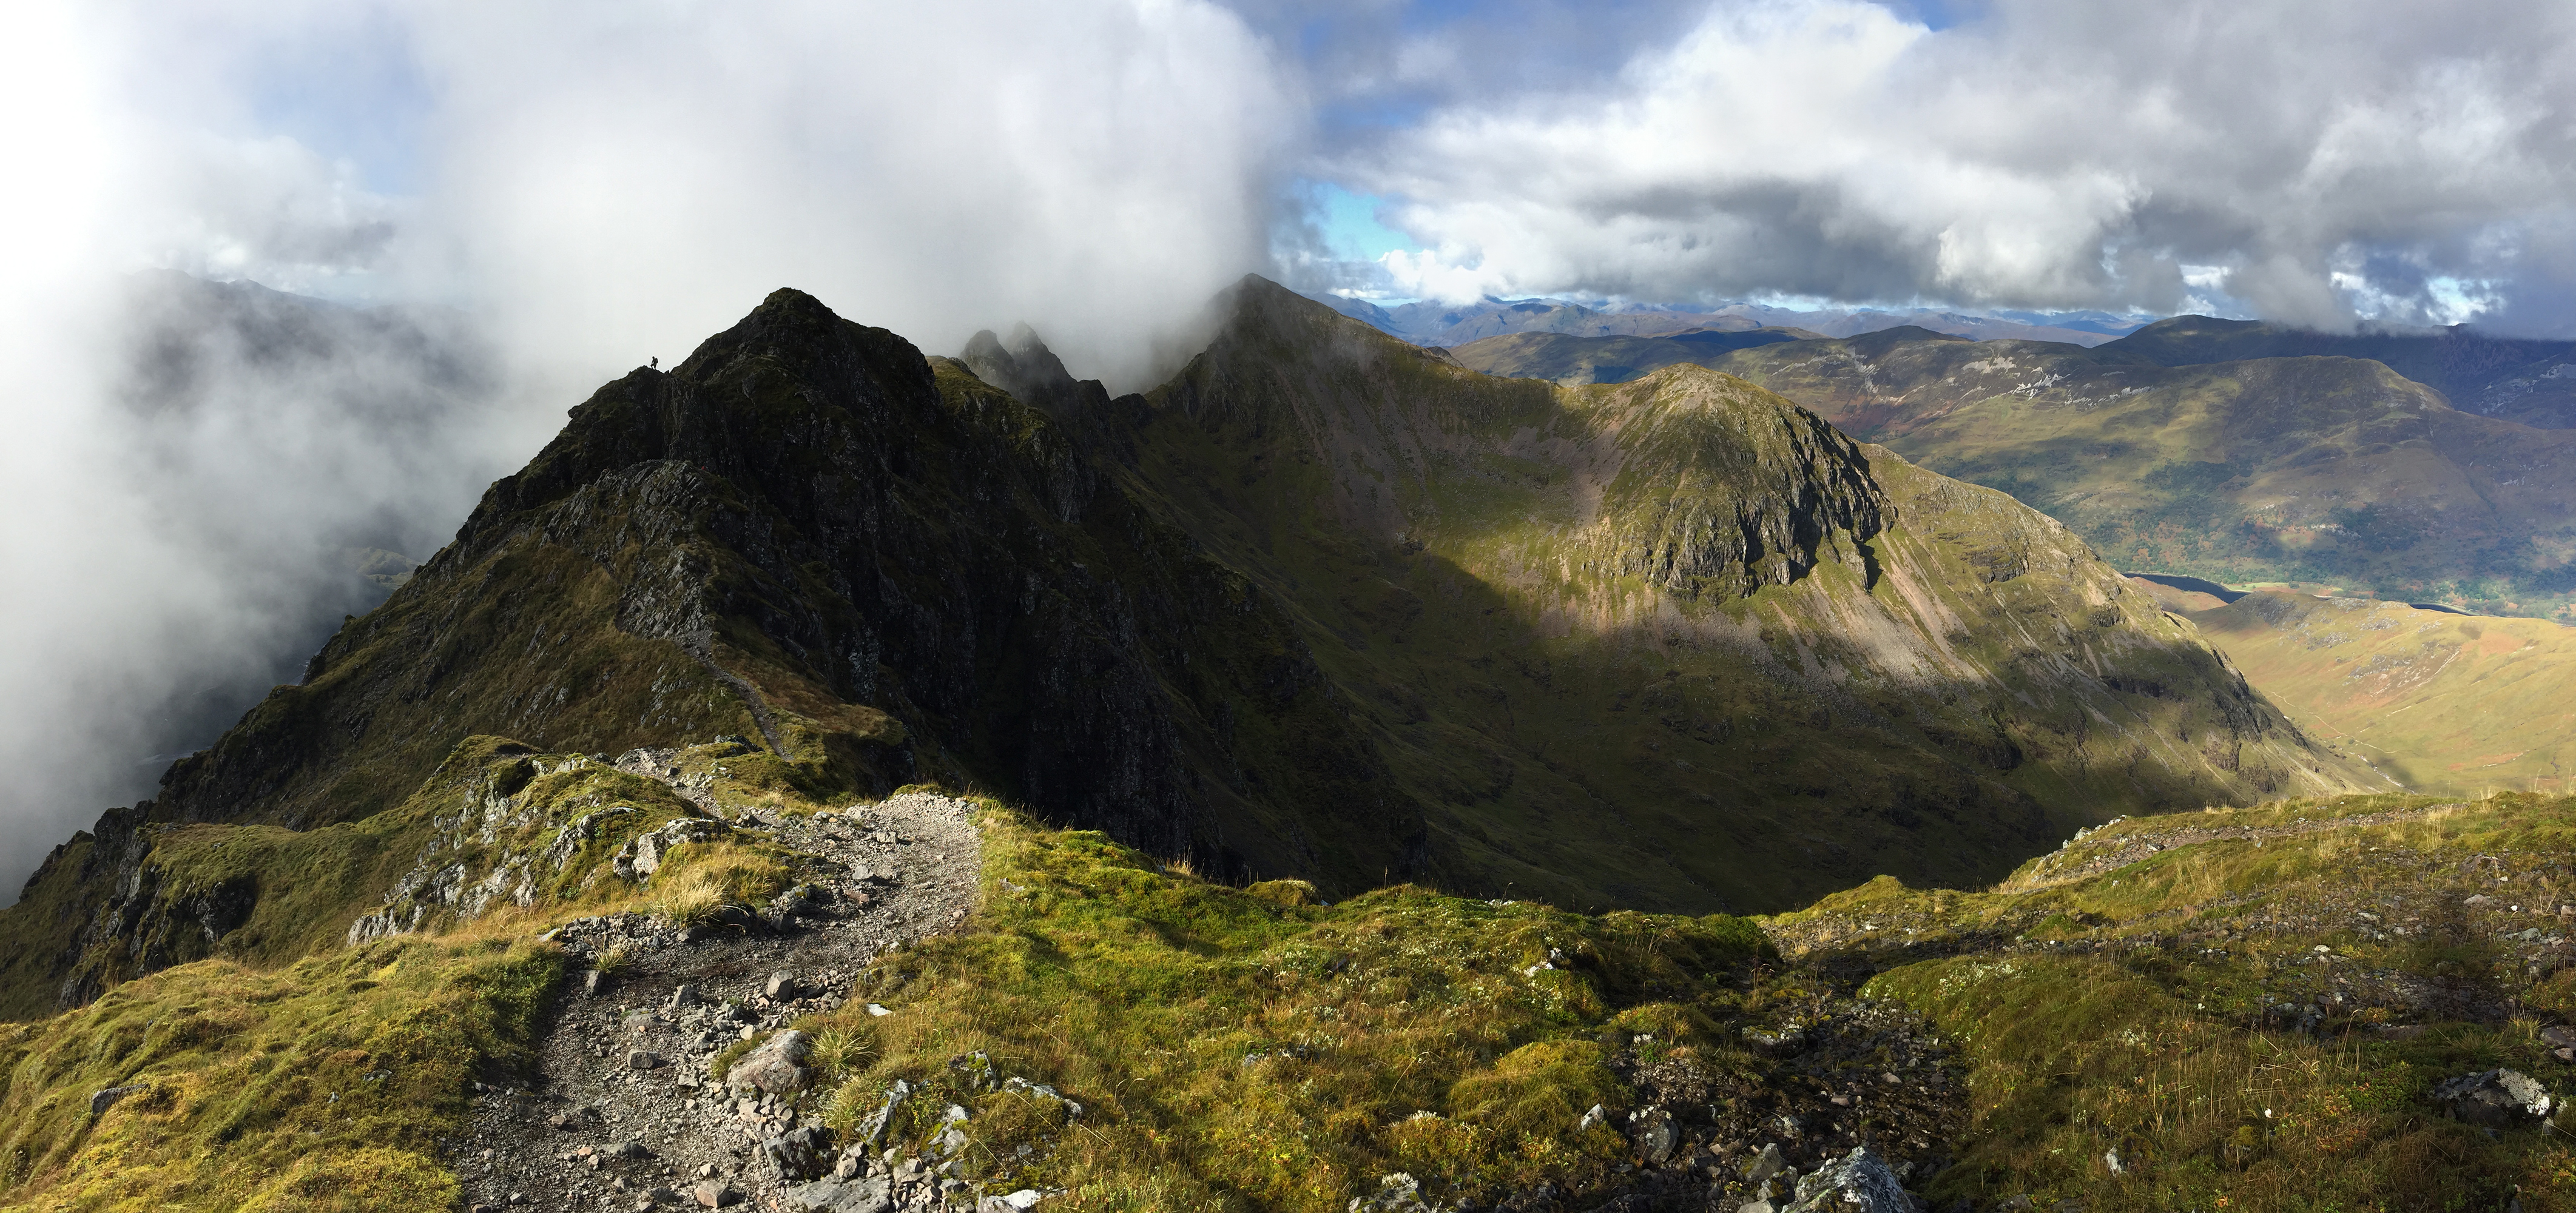 Panoramic view of the notoriously difficult Aonach Eagach mountain ridge in the Scottish Highlands.